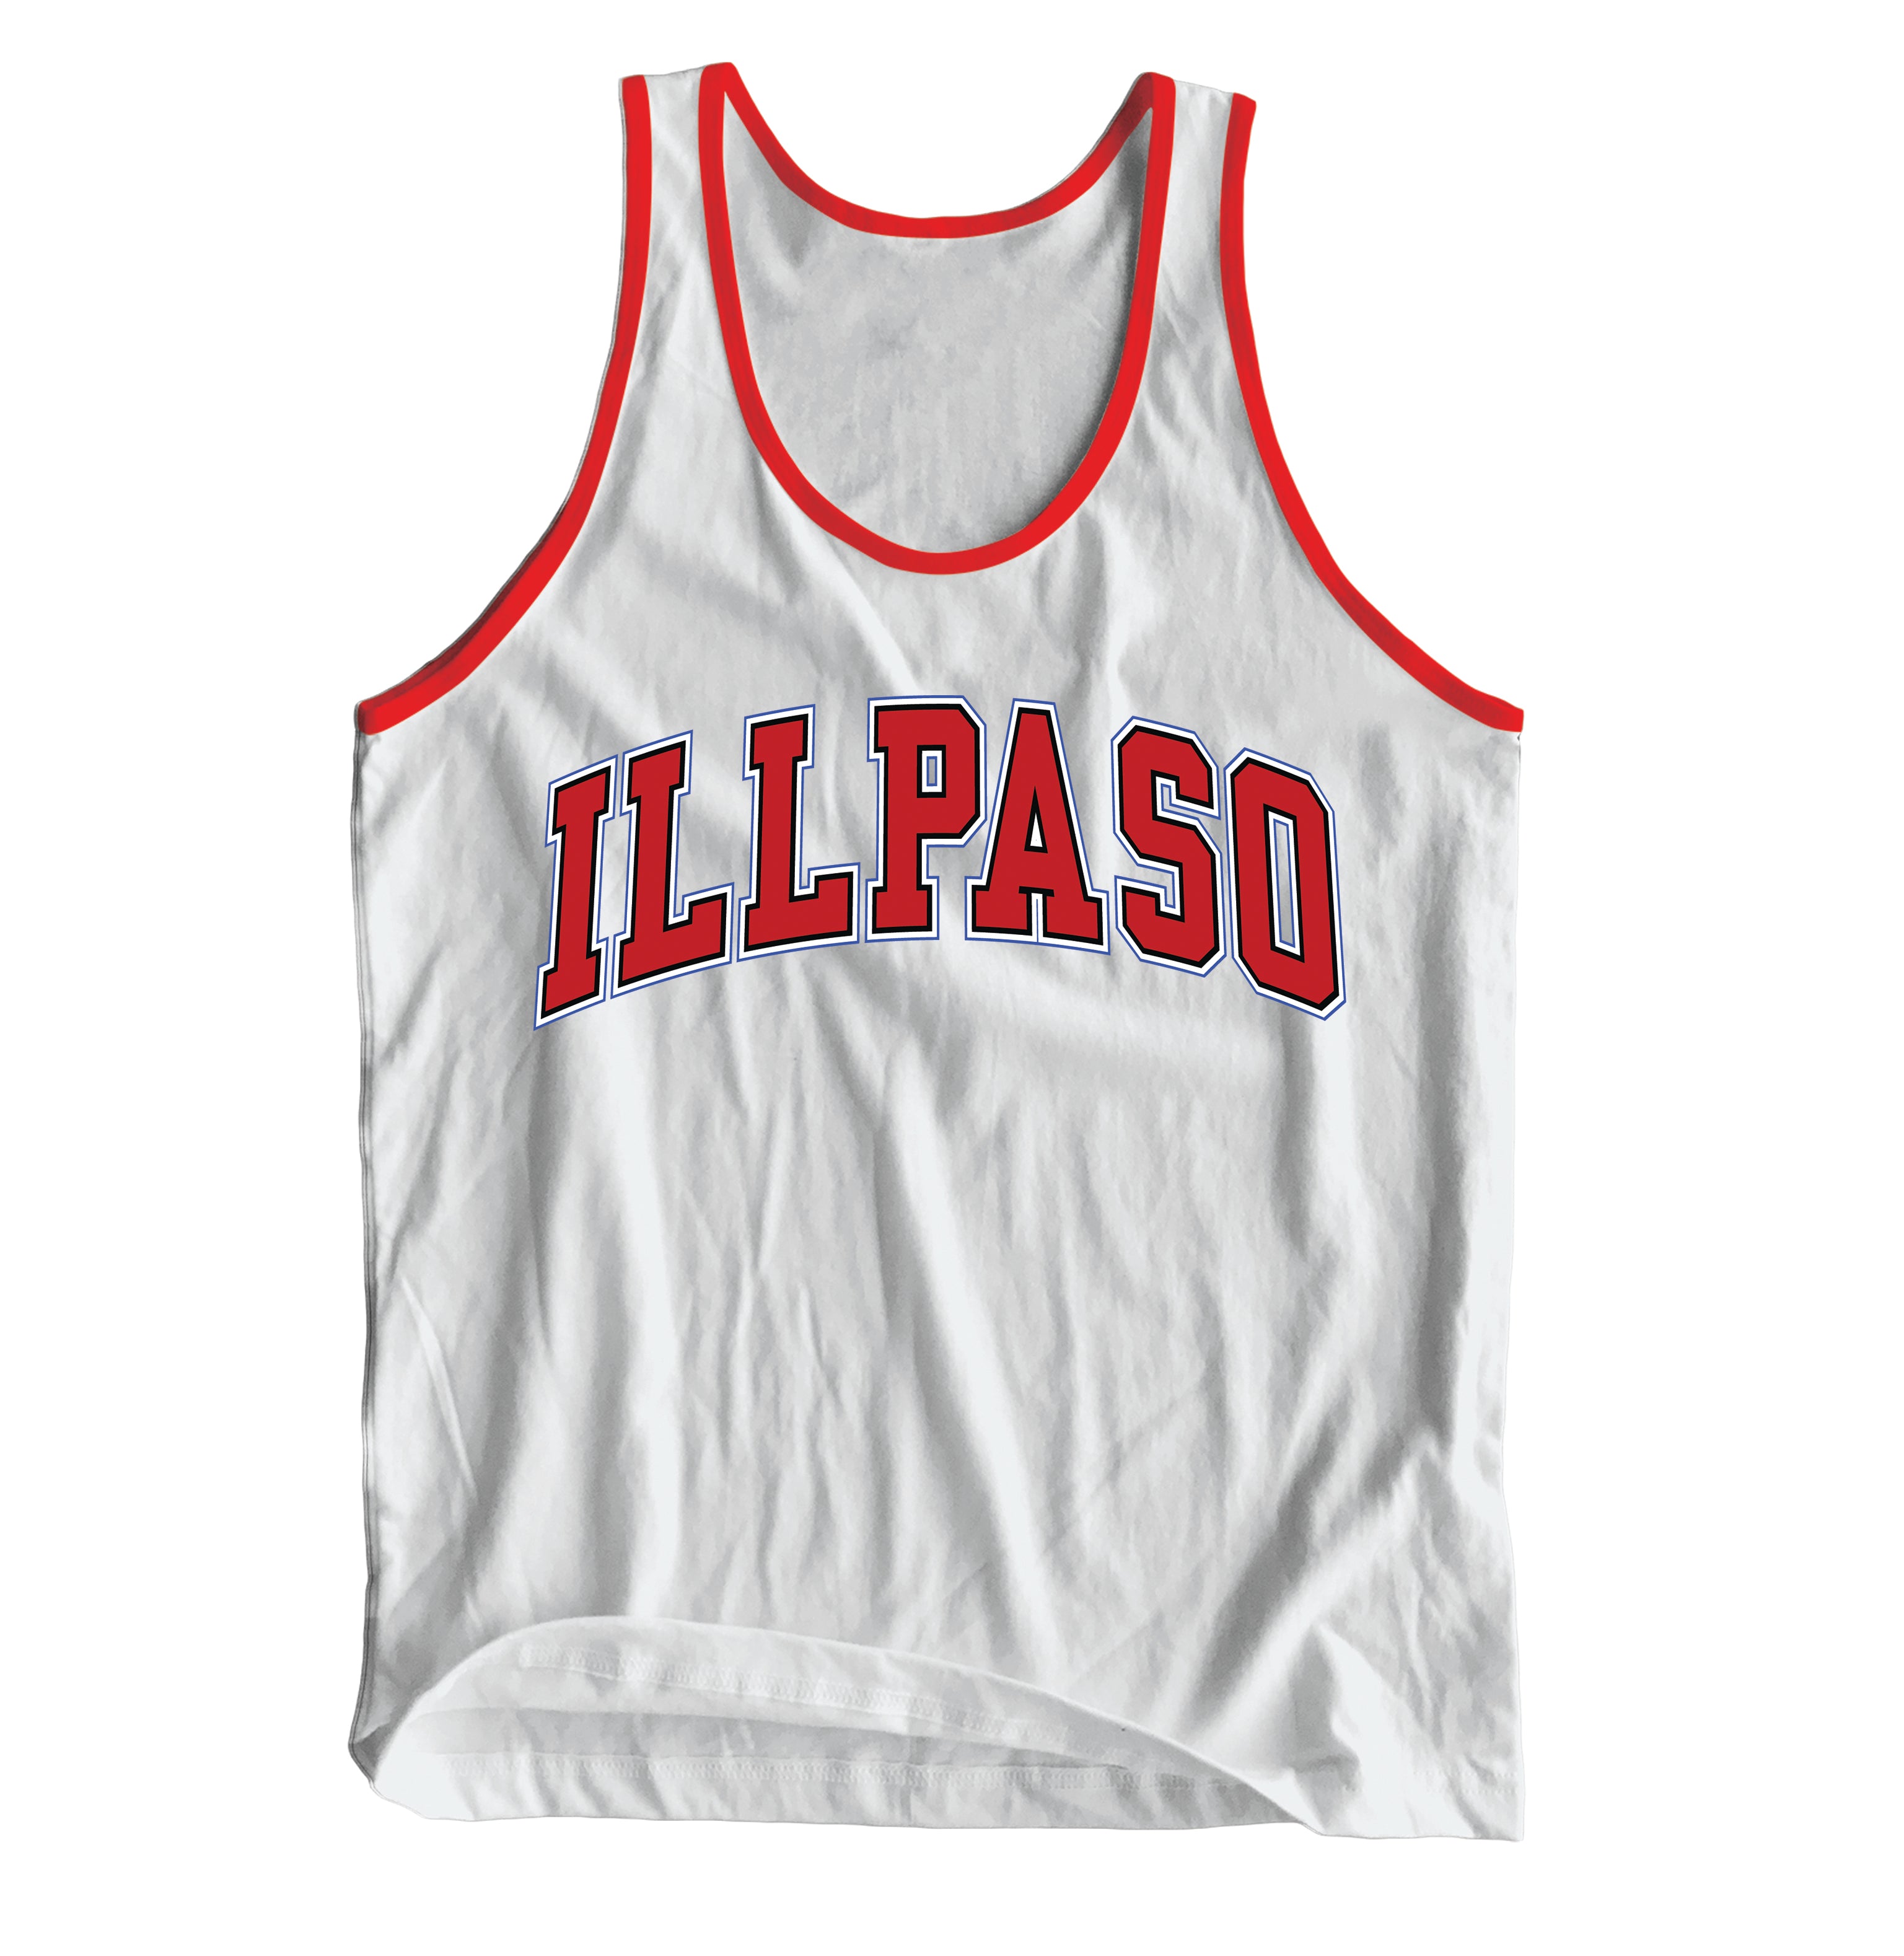 "Jersey" Unisex Tank Top (White & Red) by illpaso